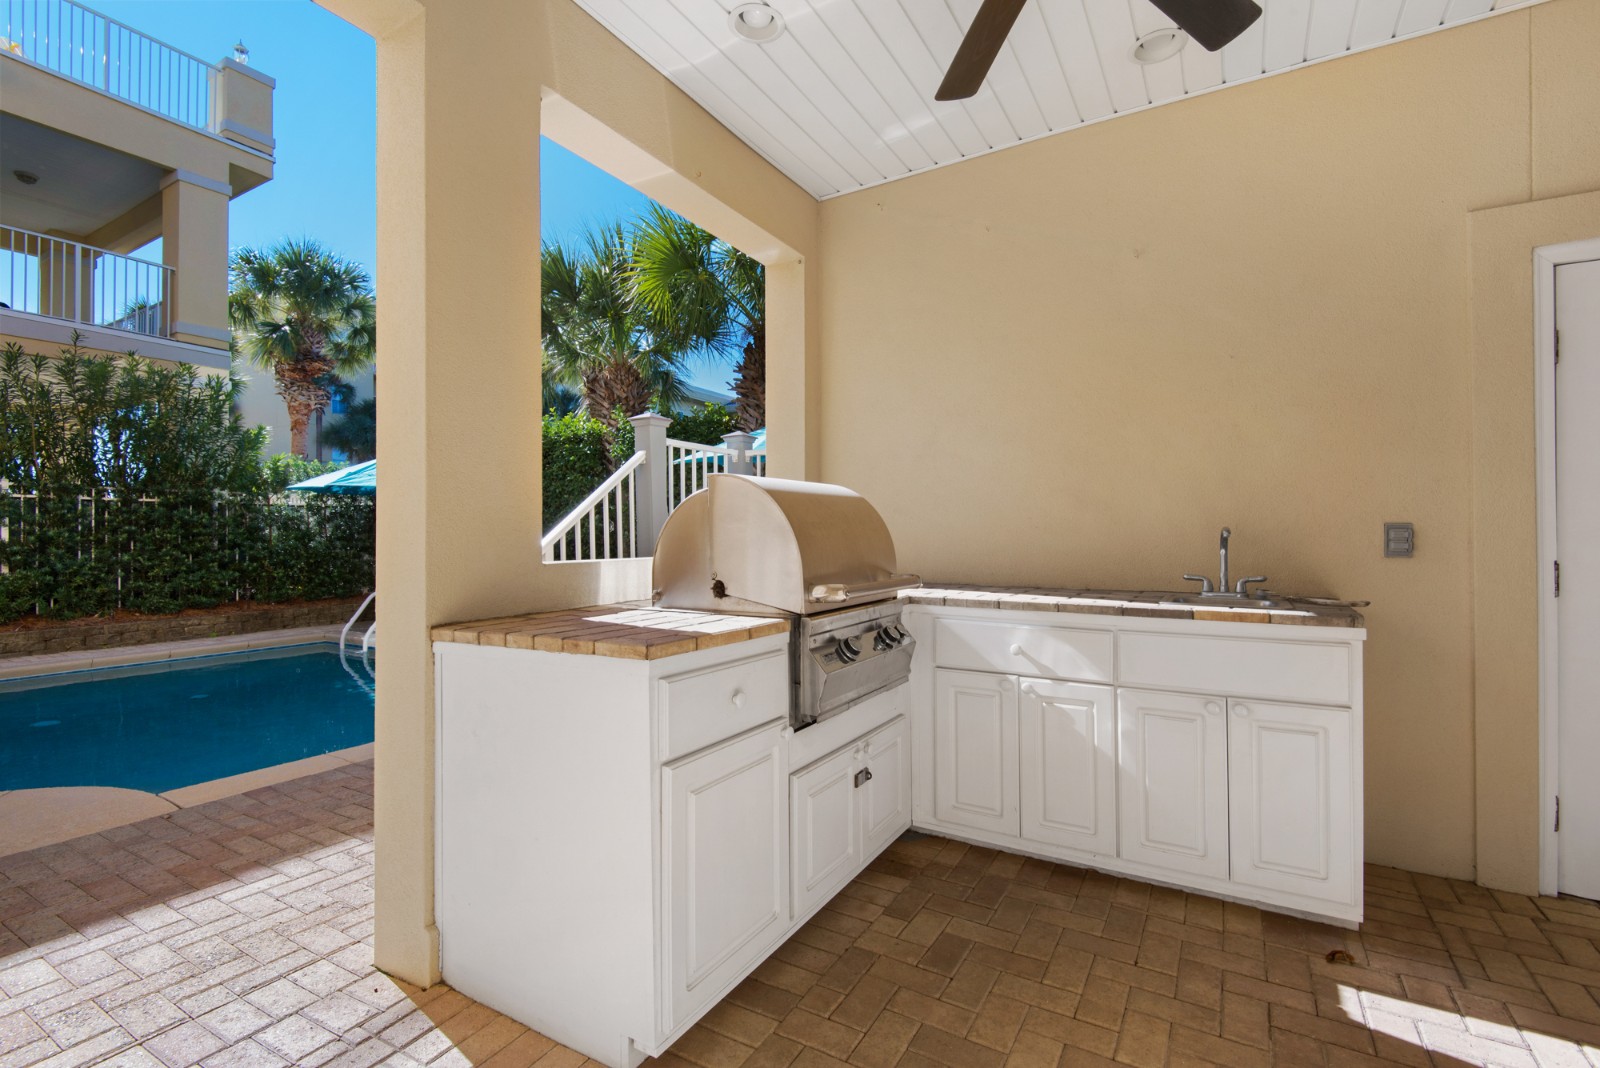 We also have an outdoor kitchen for enjoying by the pool!